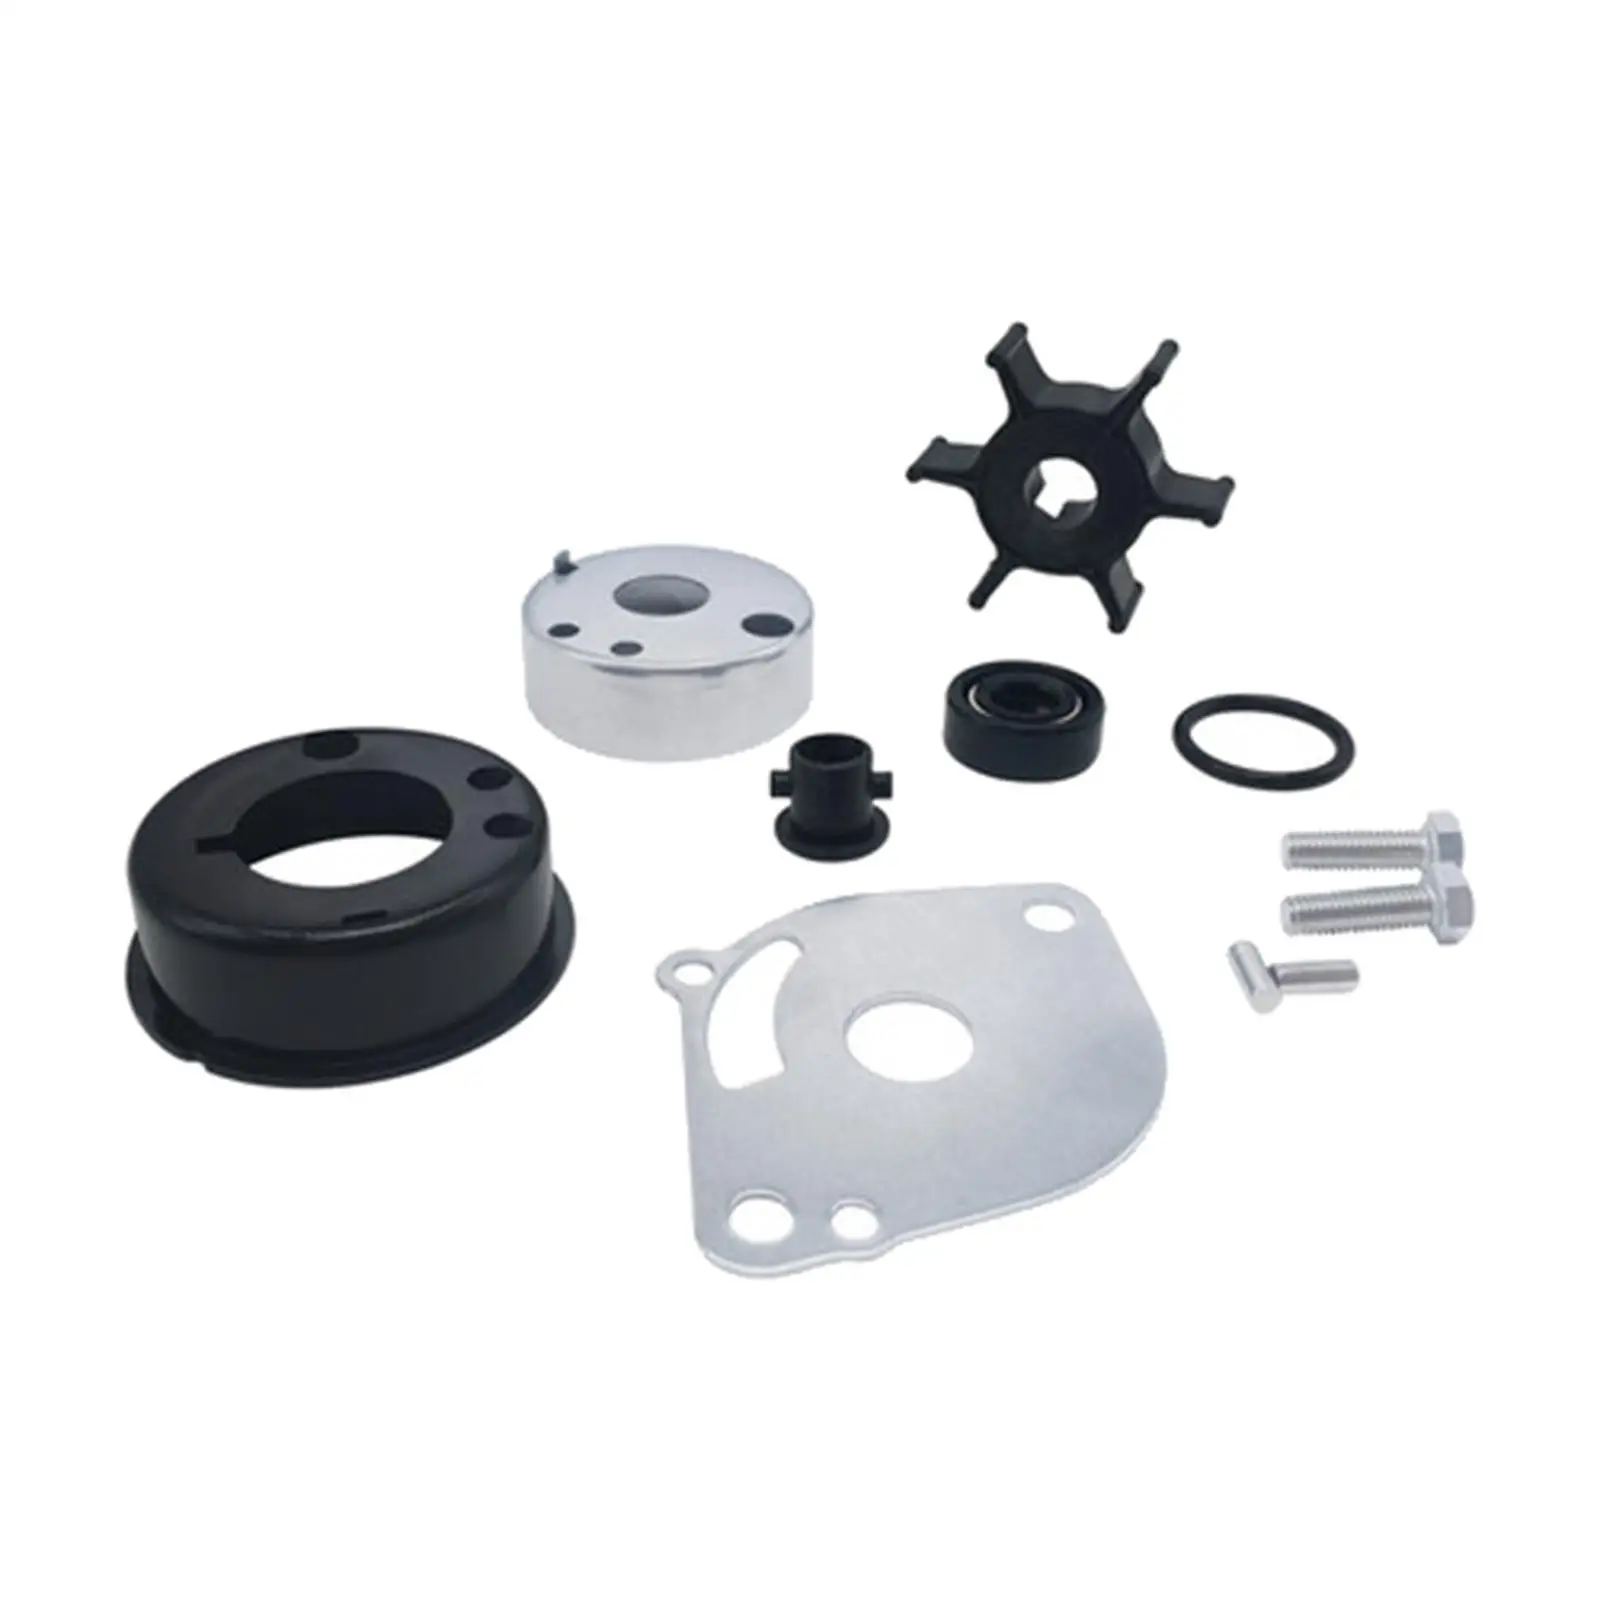 Water Pump Impeller Kit for YAMAHA 2HP 2 STROKE1988-2009 6A1-W0078-02 6A1-W0078-00   18-3462 Replacement New